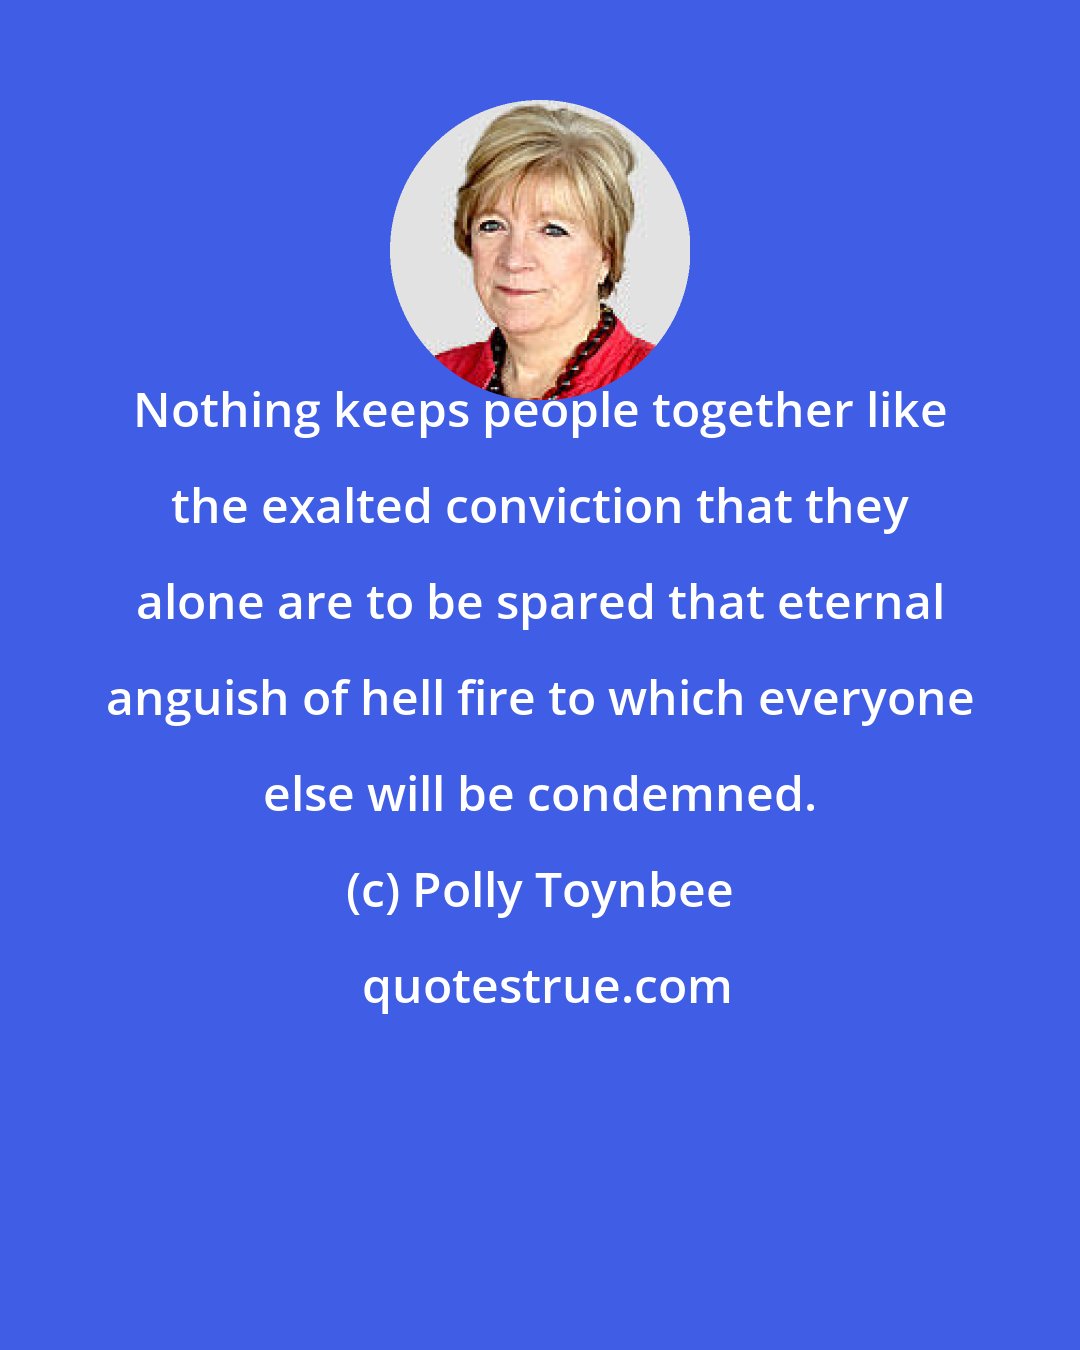 Polly Toynbee: Nothing keeps people together like the exalted conviction that they alone are to be spared that eternal anguish of hell fire to which everyone else will be condemned.